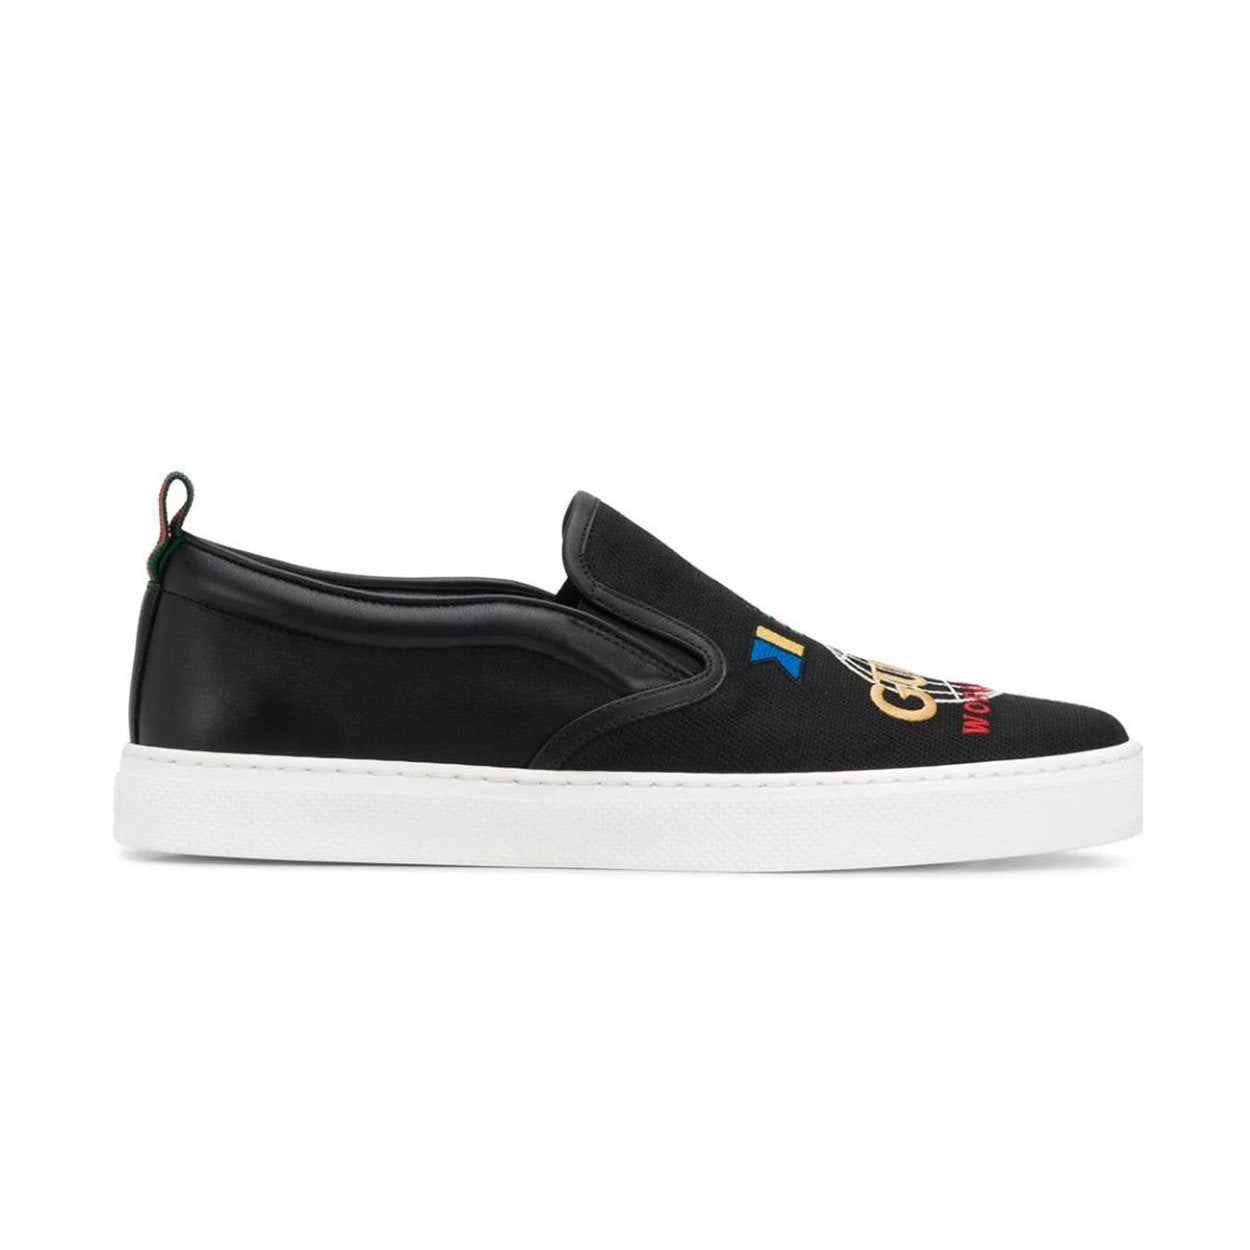 Gucci sneakers shoes with sweat shorts｜TikTok Search